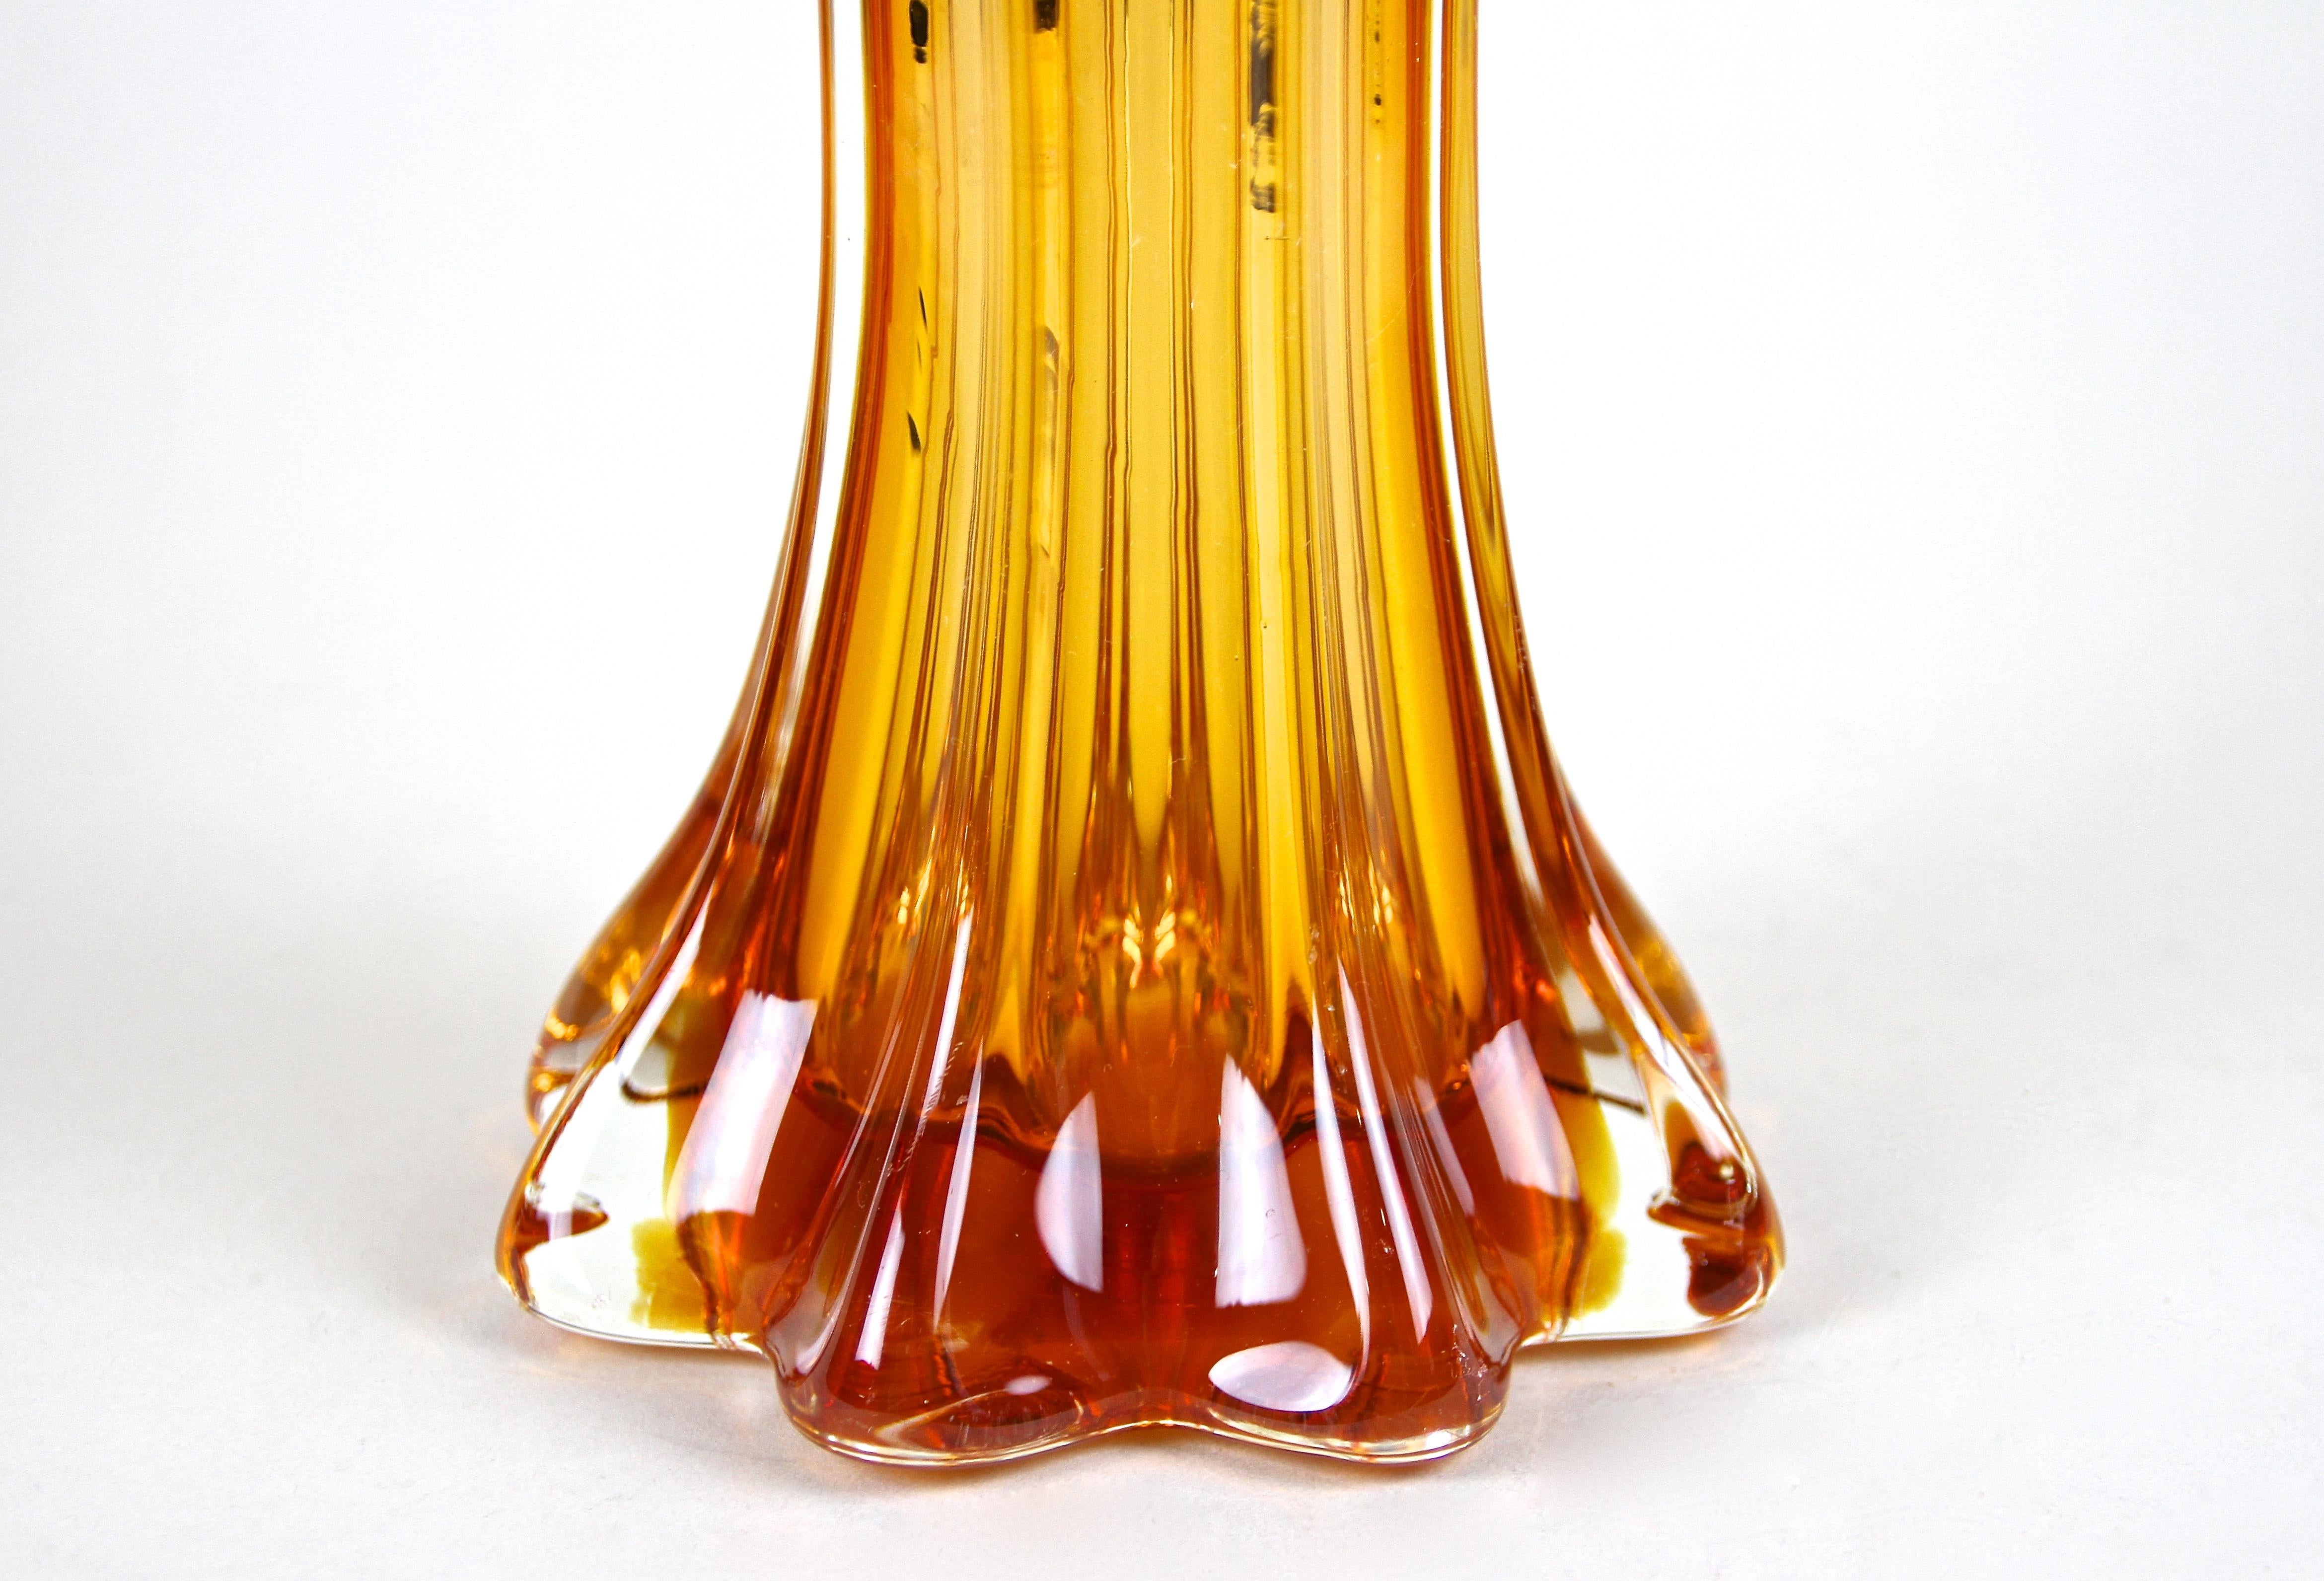 Colorful large mid-century Murano glass vase out of the famous glass art workshop Sommerso in Venetia/ Italy. Artfully made around 1960/70 this decorative, beautifully shaped glass vase impresses with its pleasing coloration going from a shining red